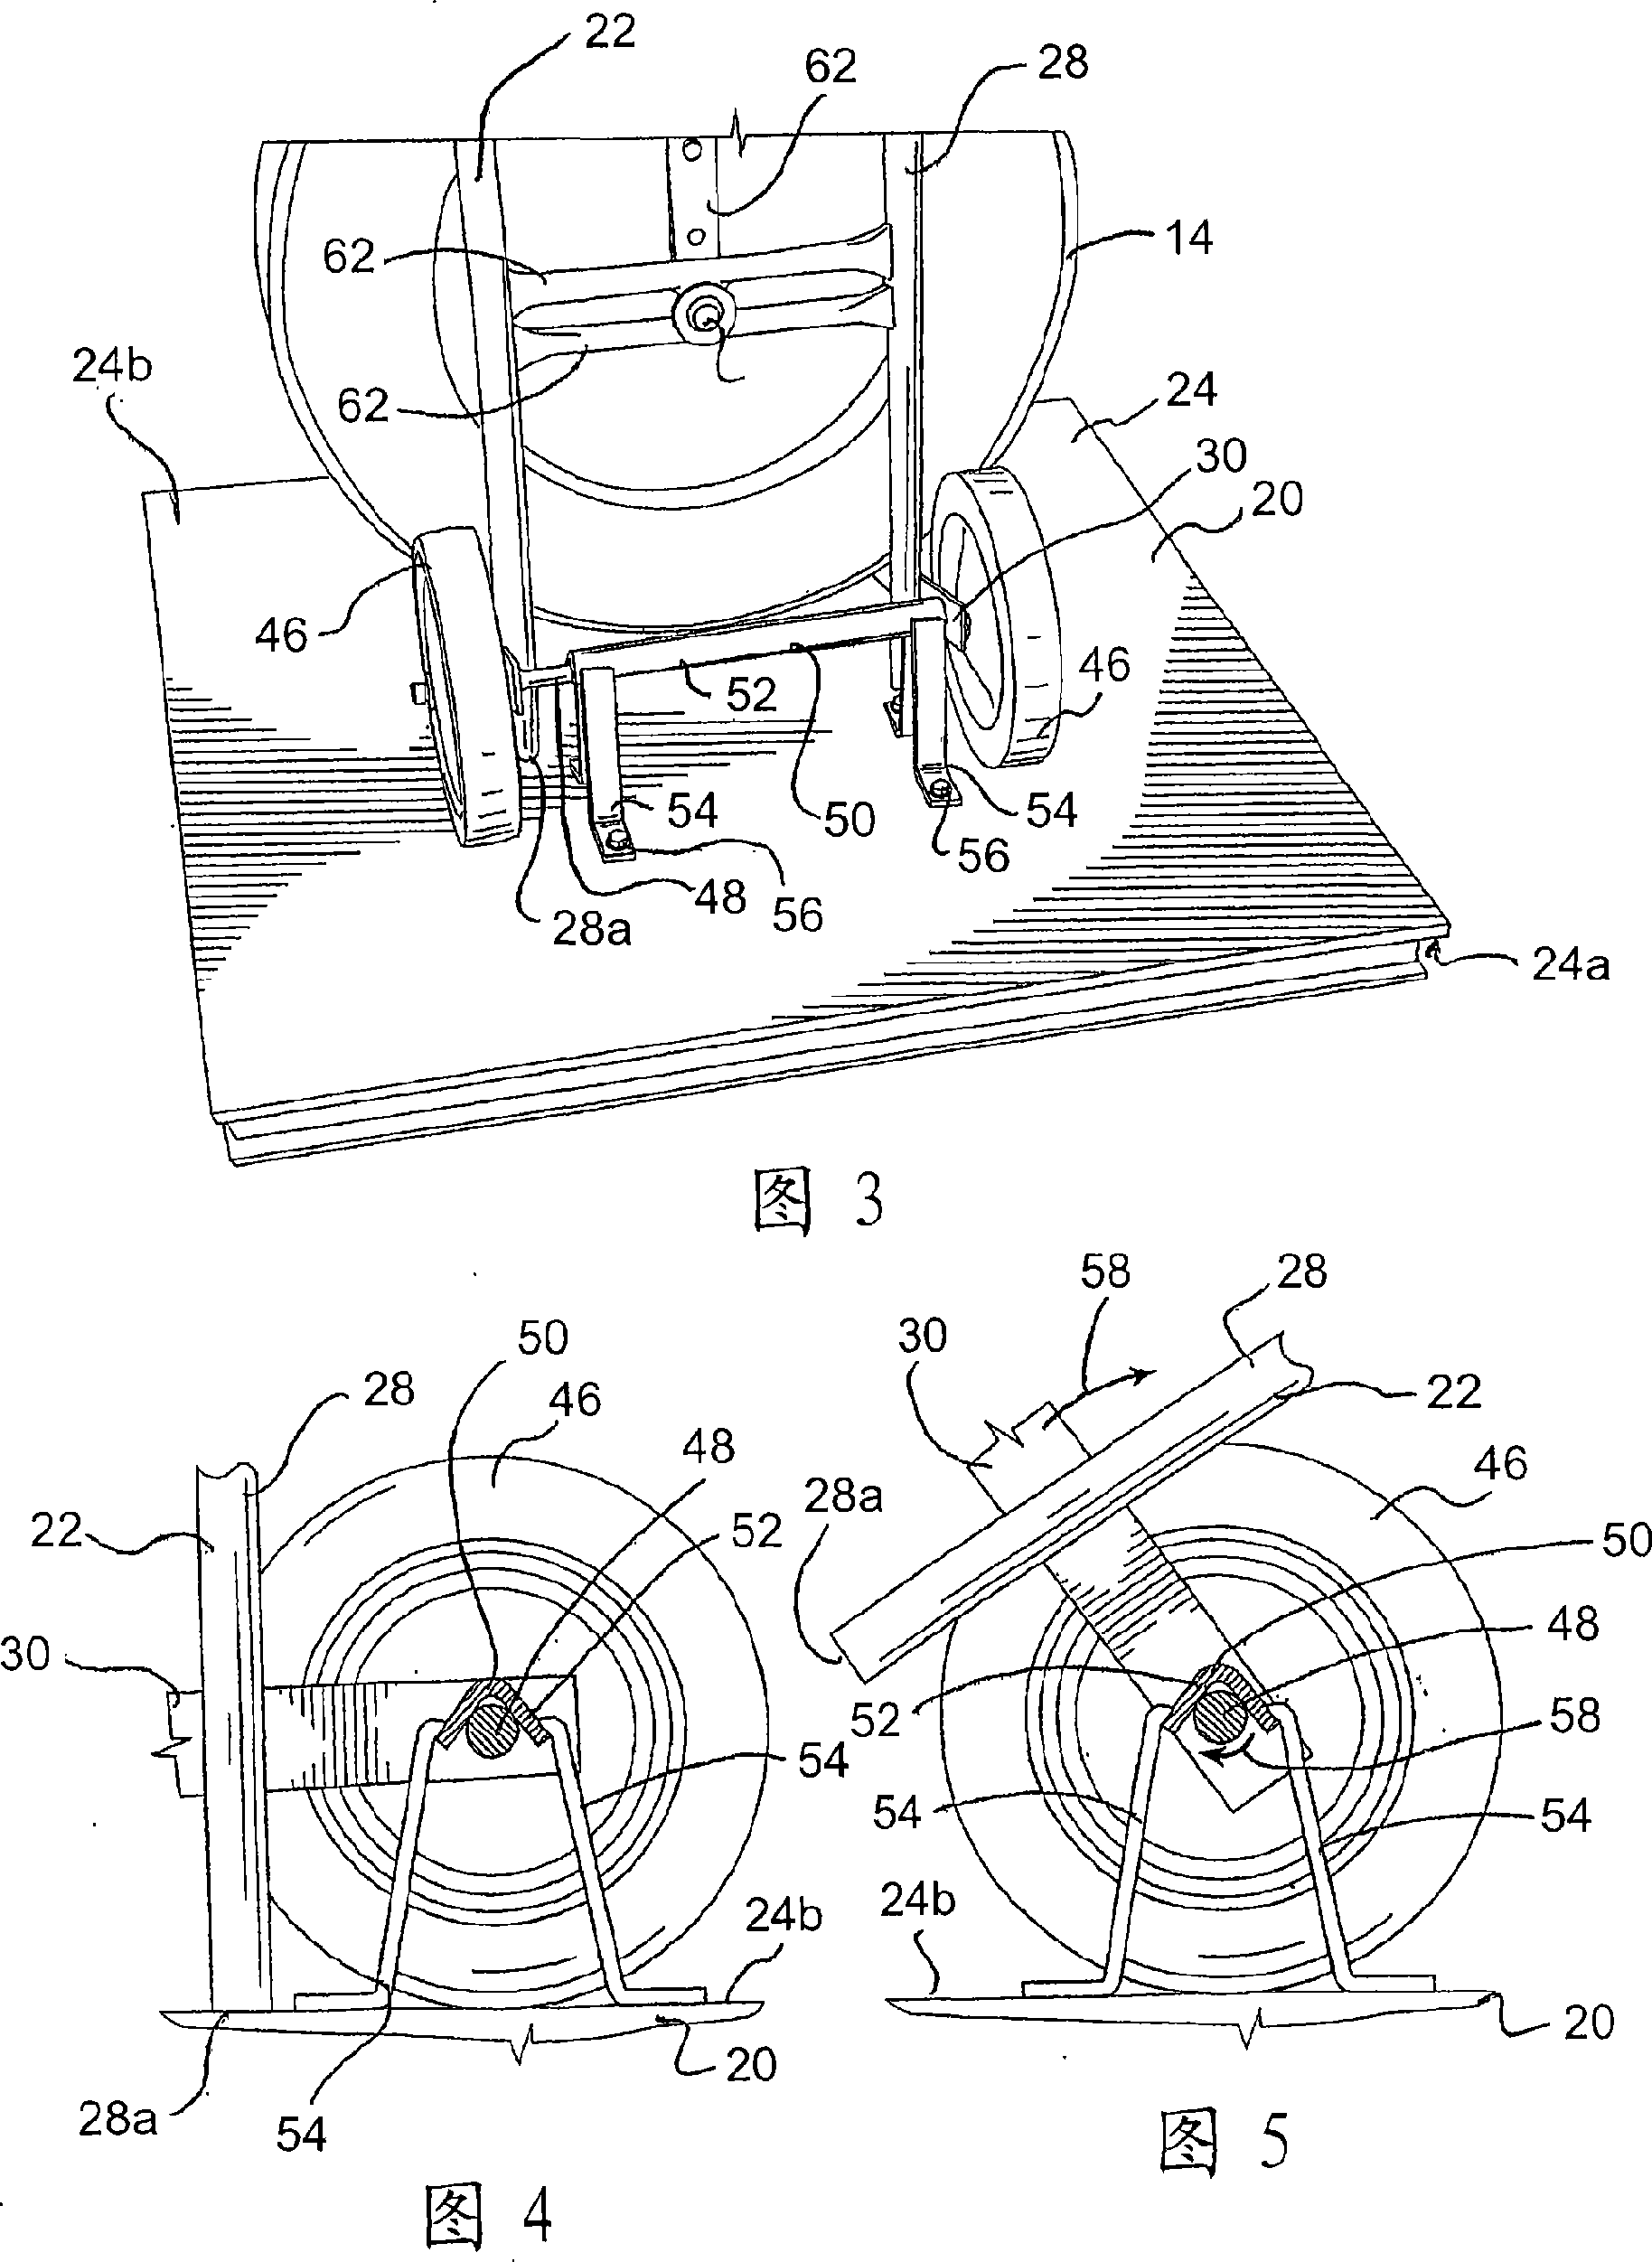 Method and apparatus for transporting and dispensing a strap